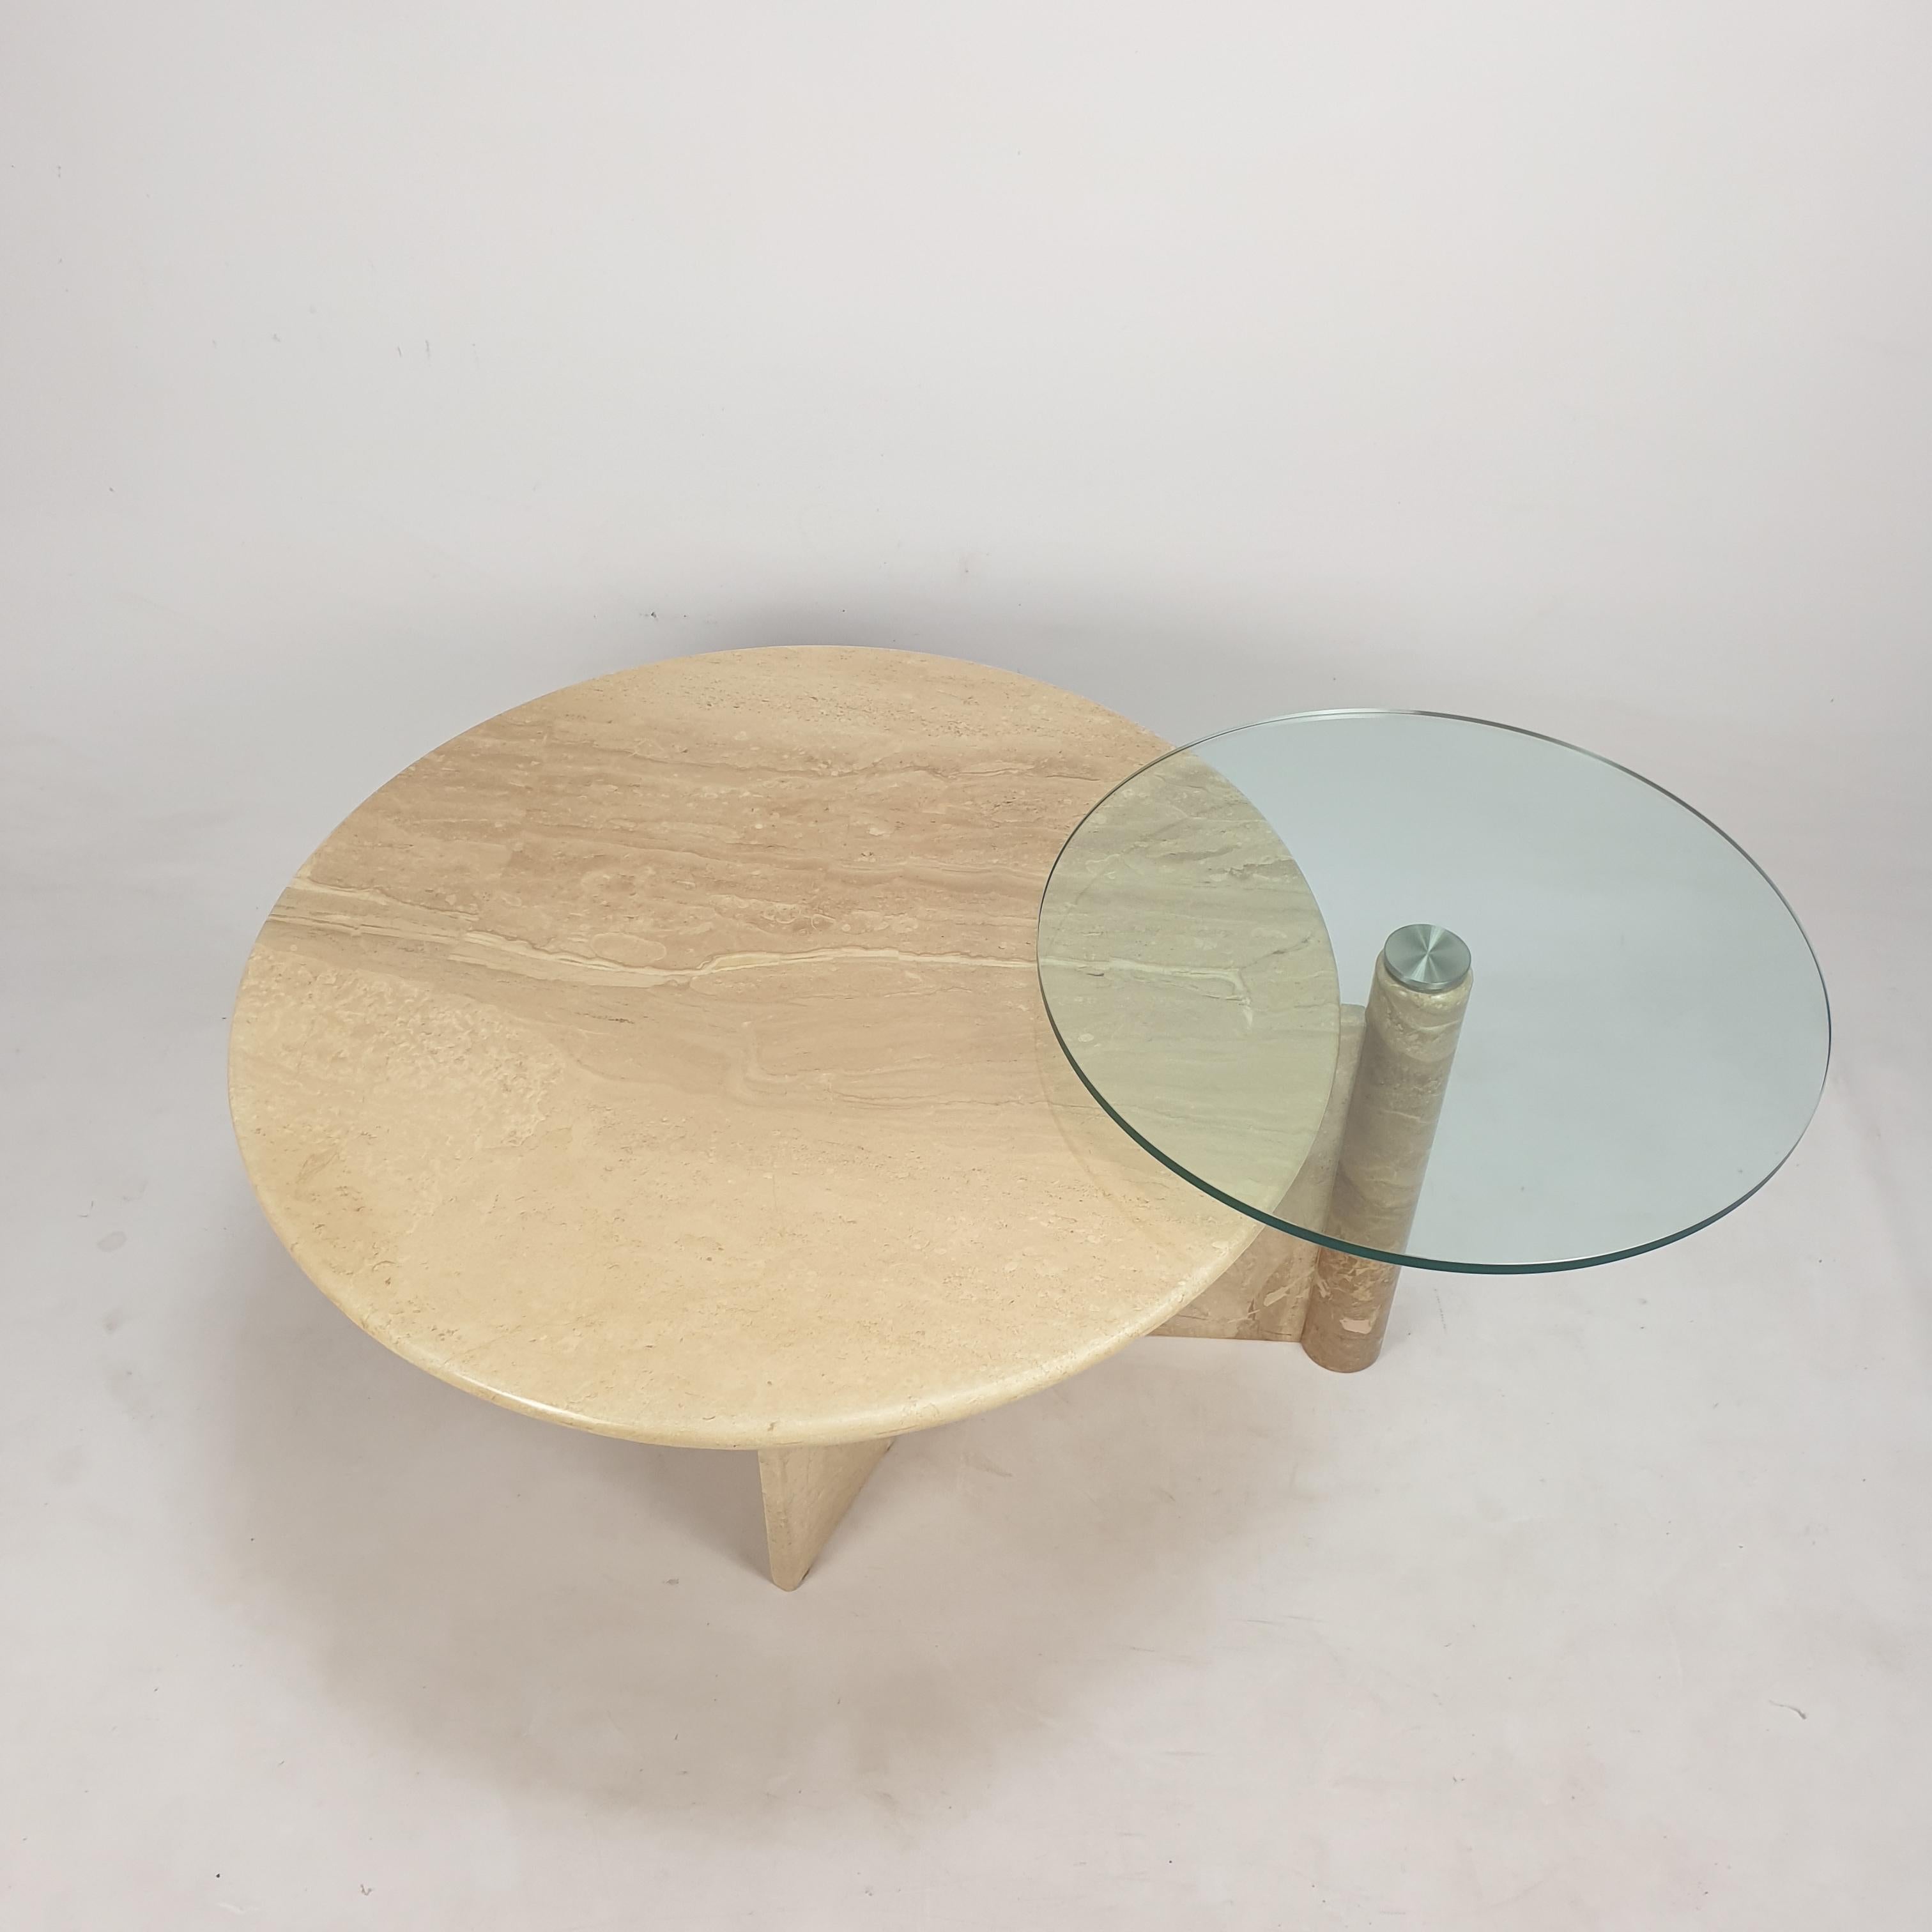 Italian Travertine and Glass Coffee Table, 1980s For Sale 1